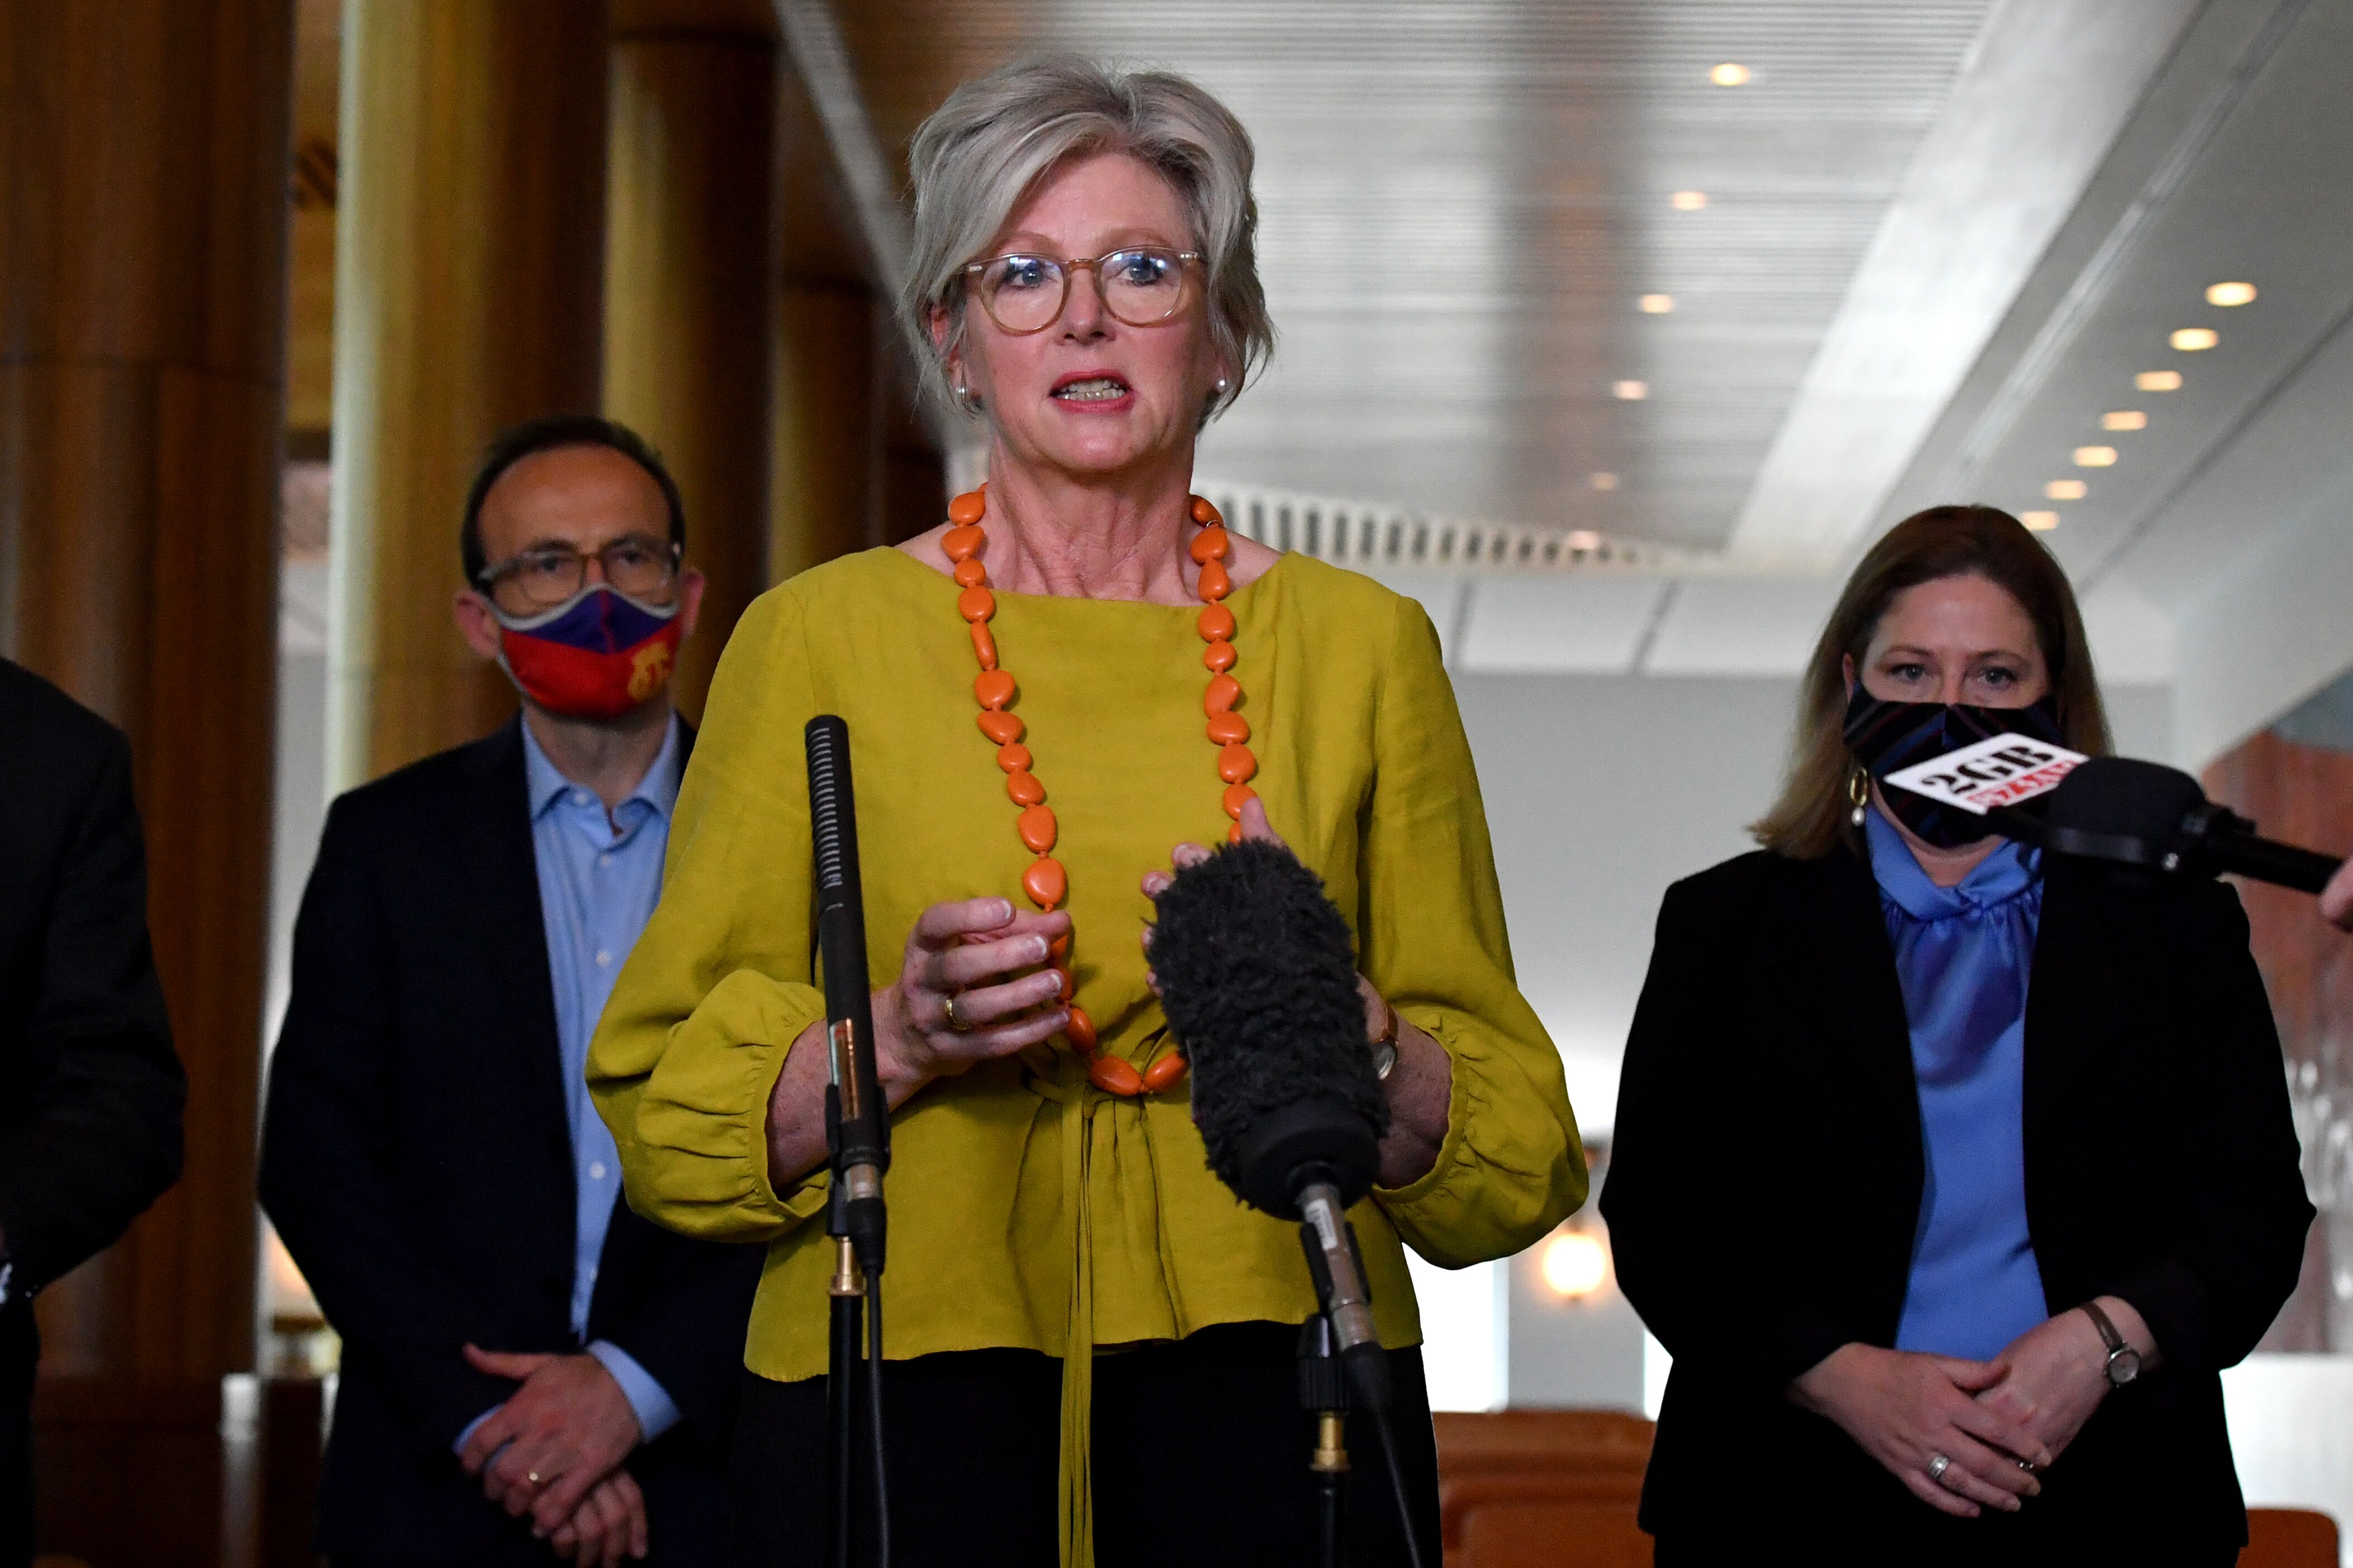 Independent Member for Indi Helen Haines at press conference at Parliament House in Canberra.